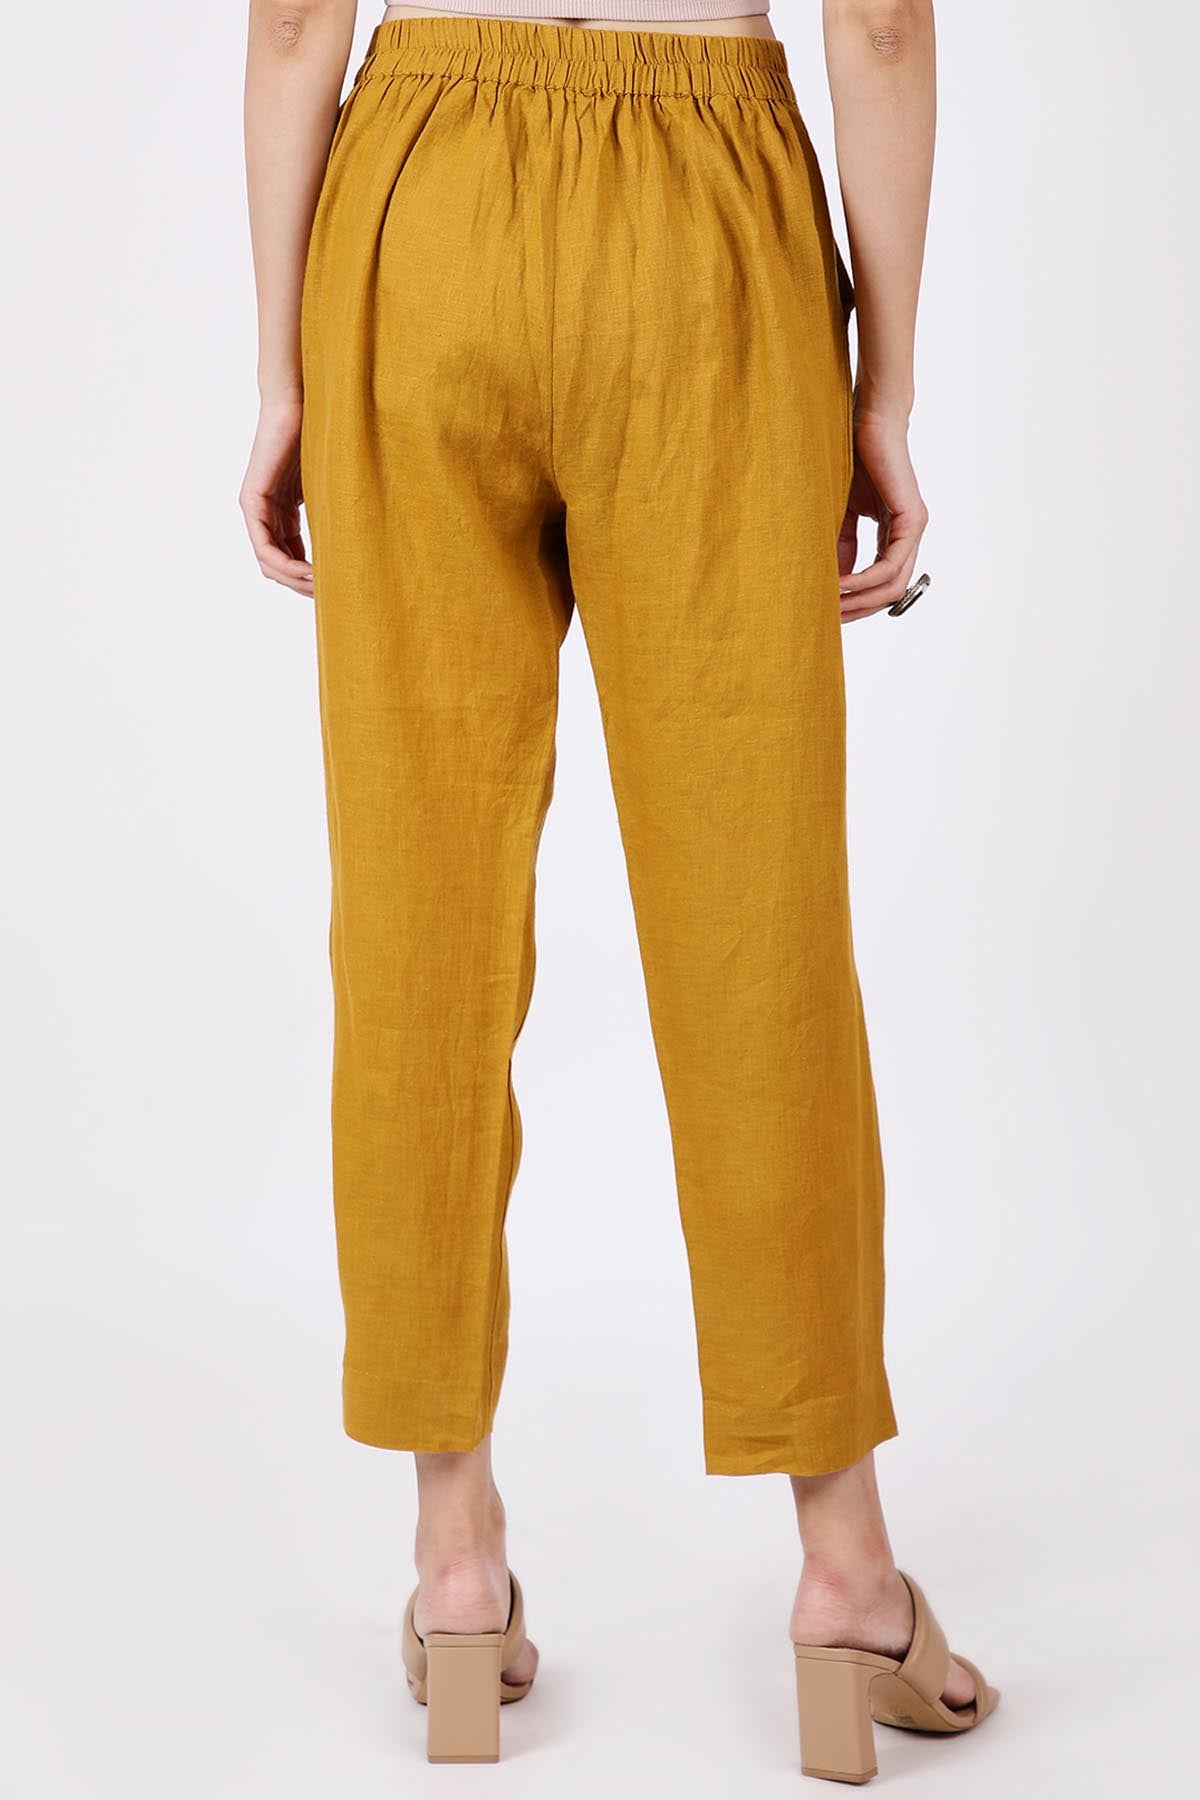 100% Linen Relaxed Fit Pants